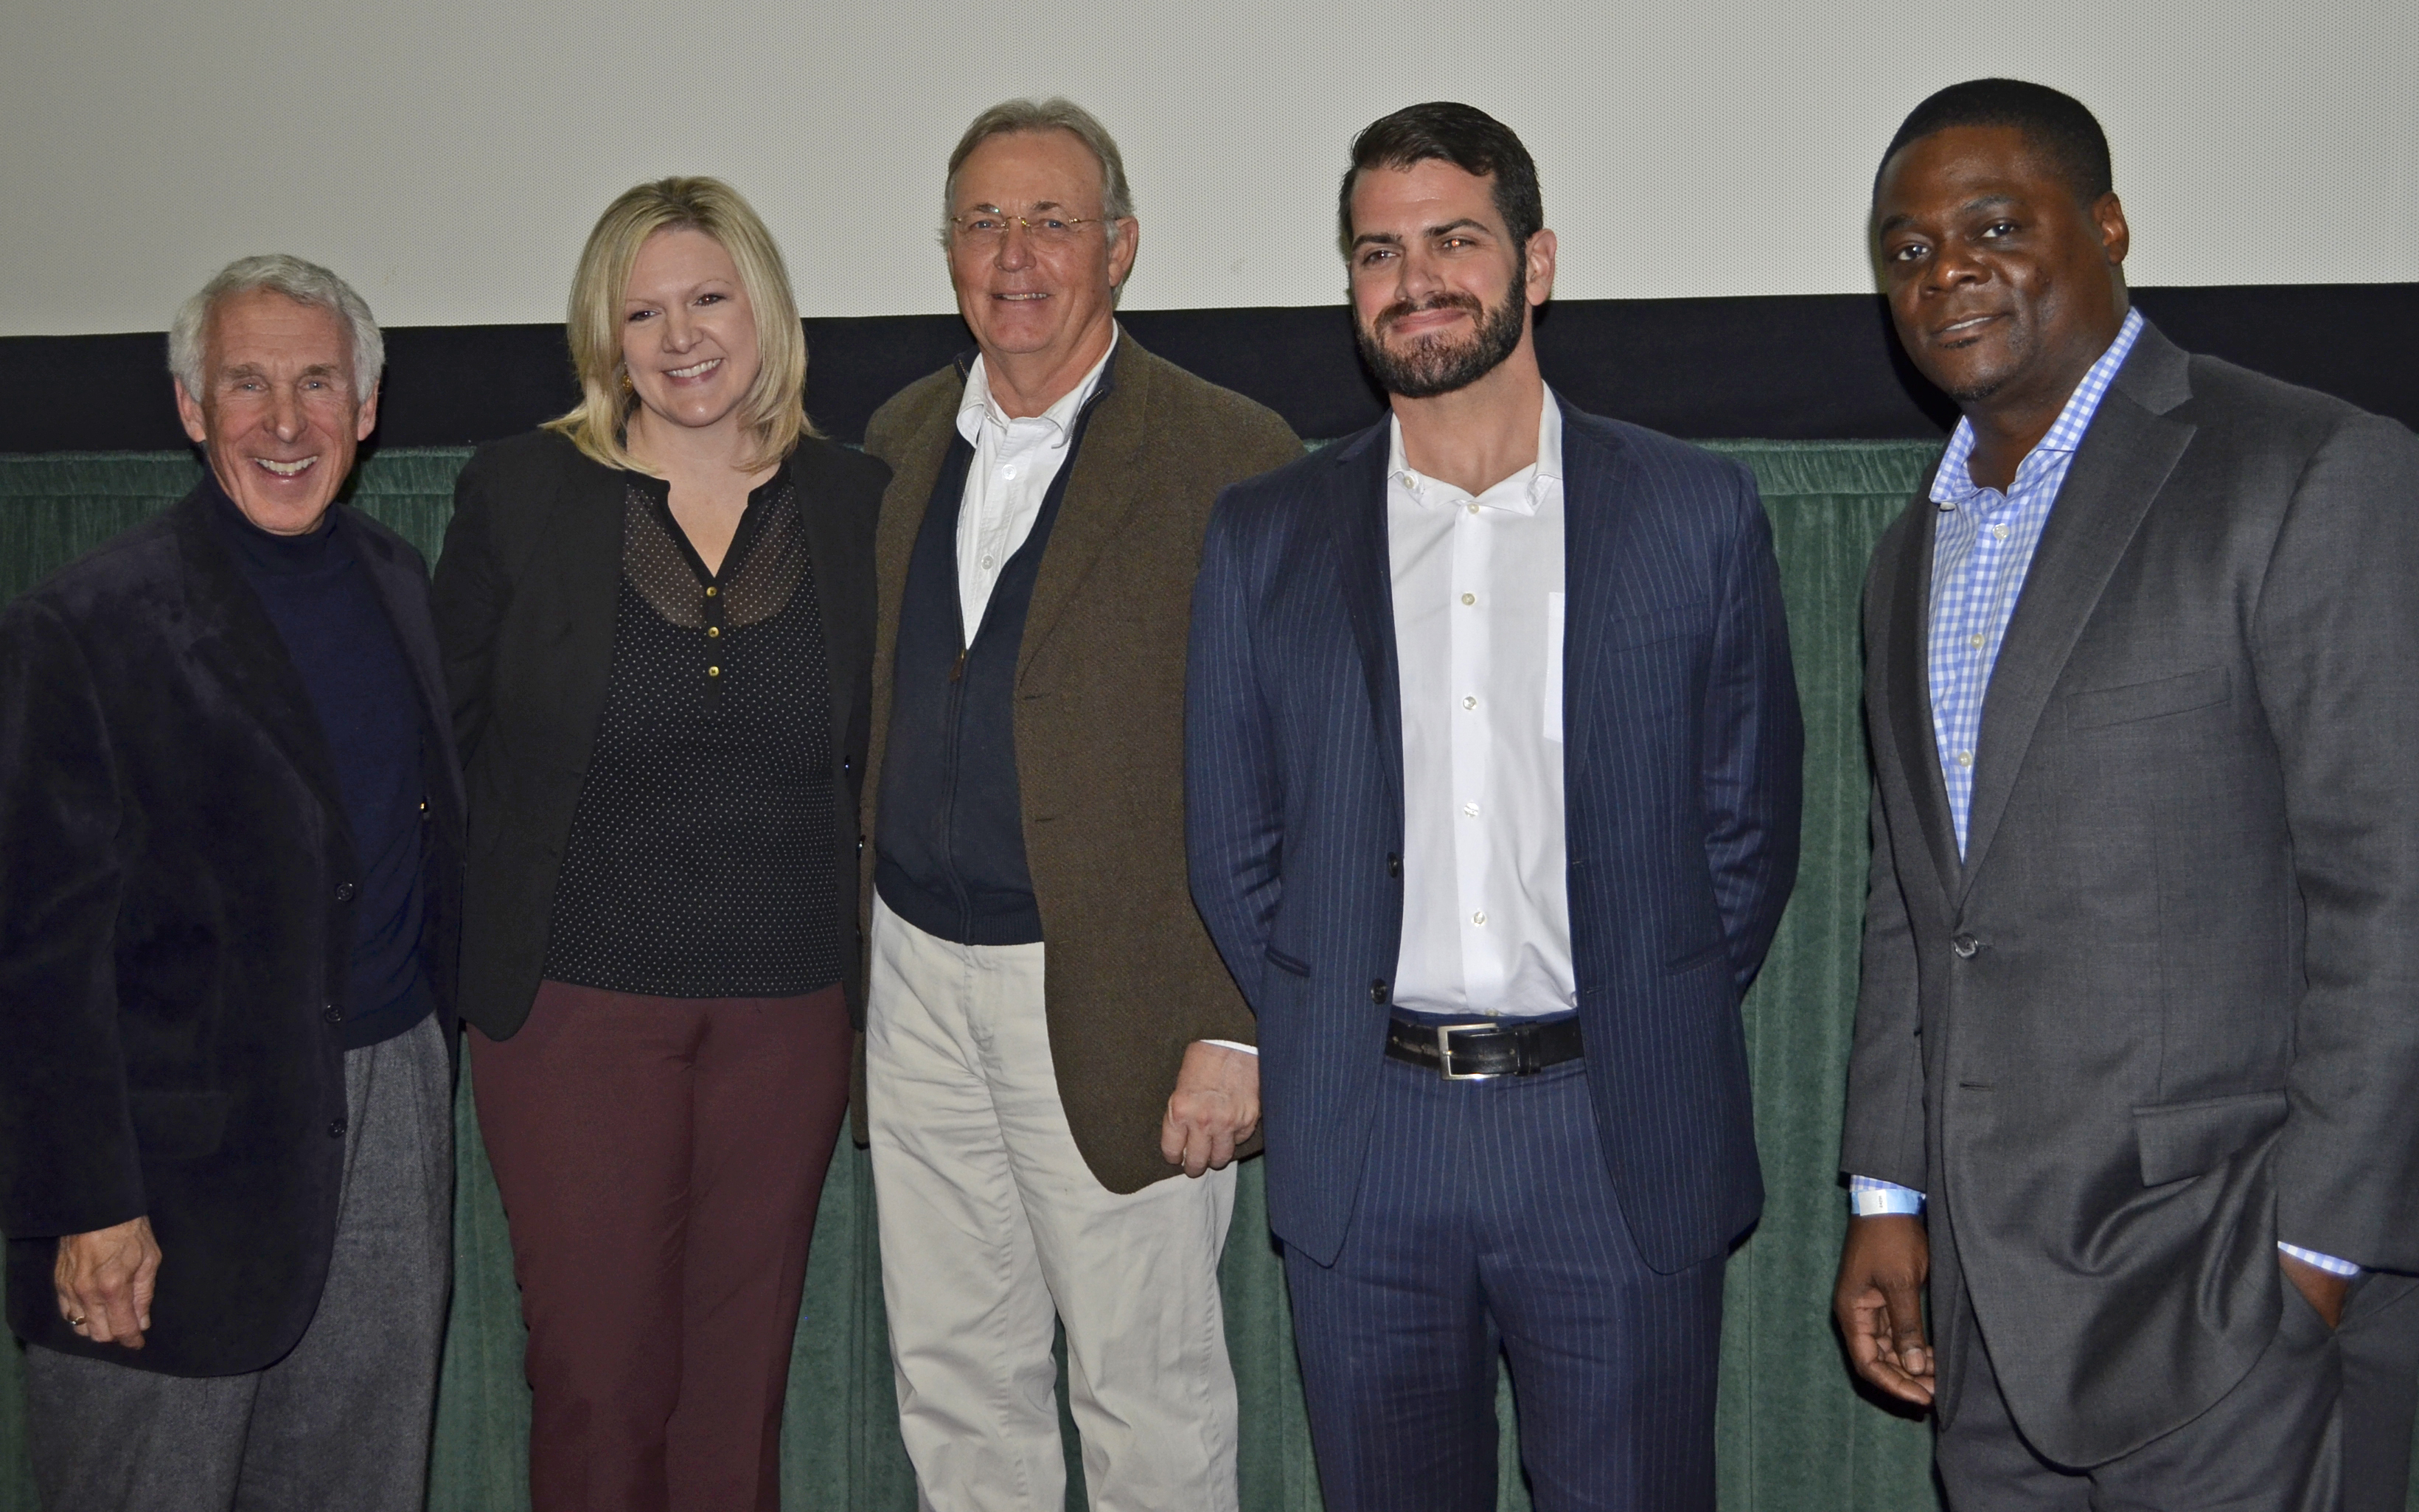 Dr. Craig DiTommaso, second from left, poses with panelists following the TIRR Foundation's screening of "Concussion".